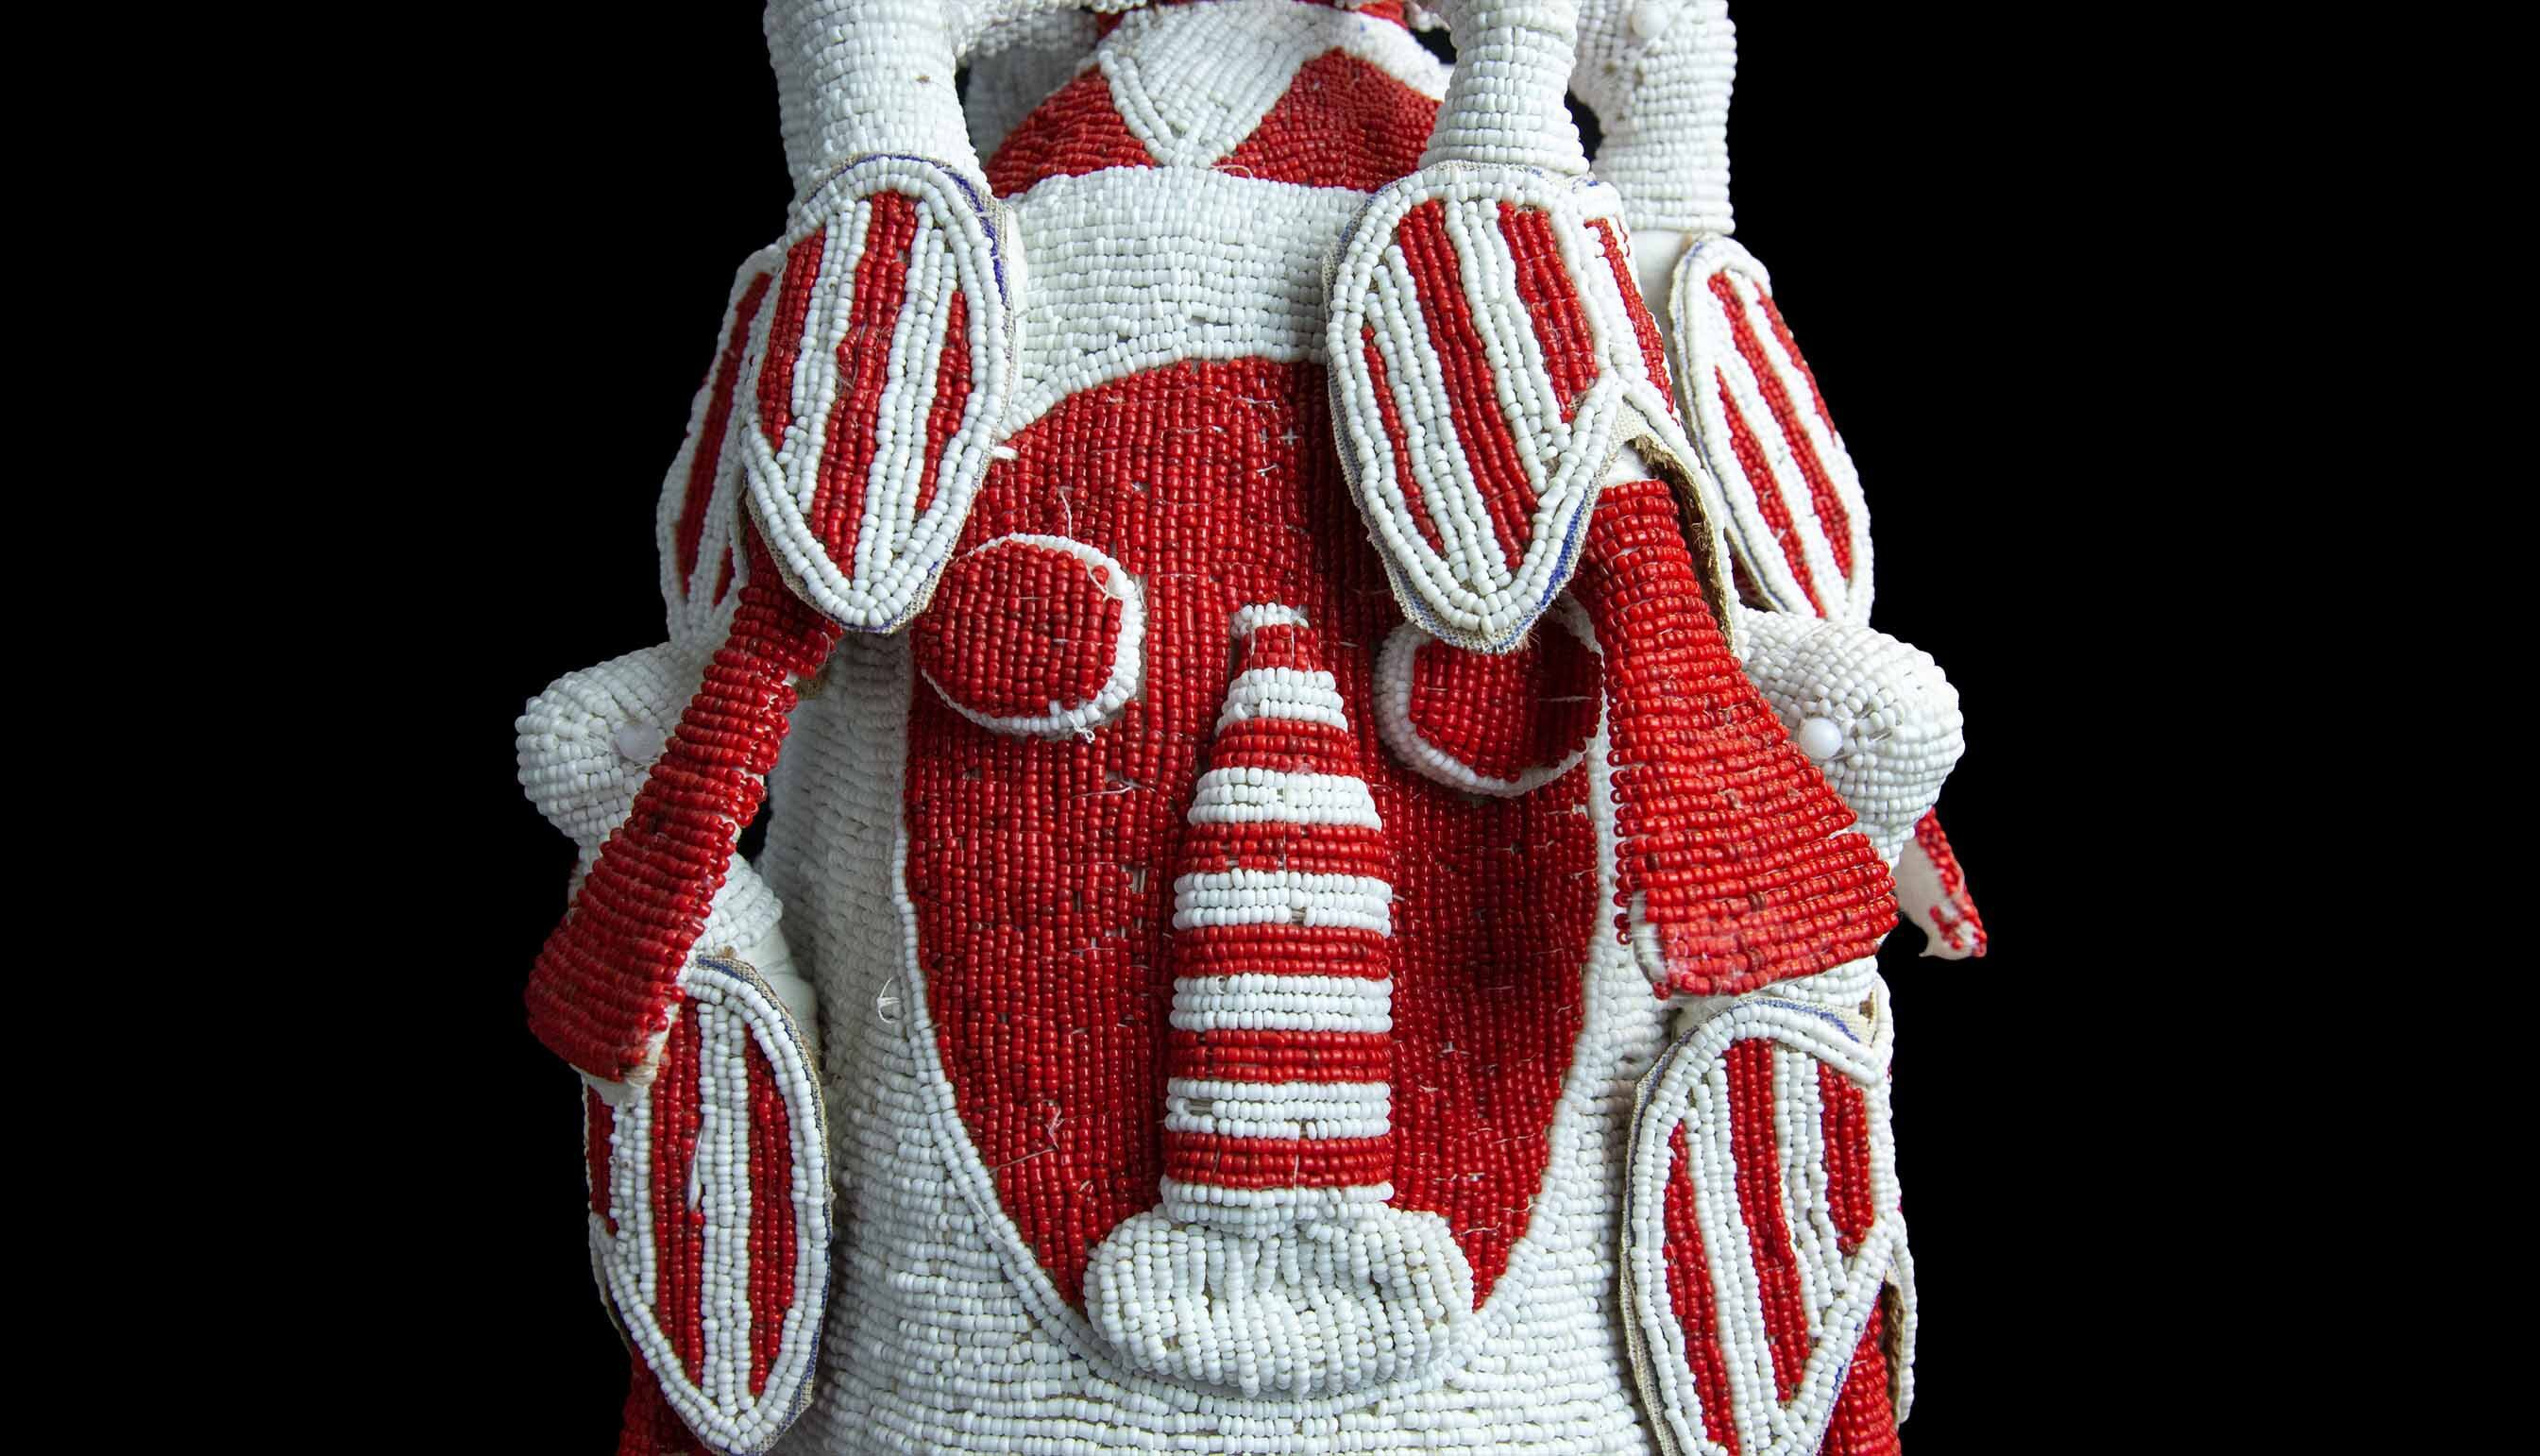 Beaded Ceremonial Headdress From Nigeria, Red and White